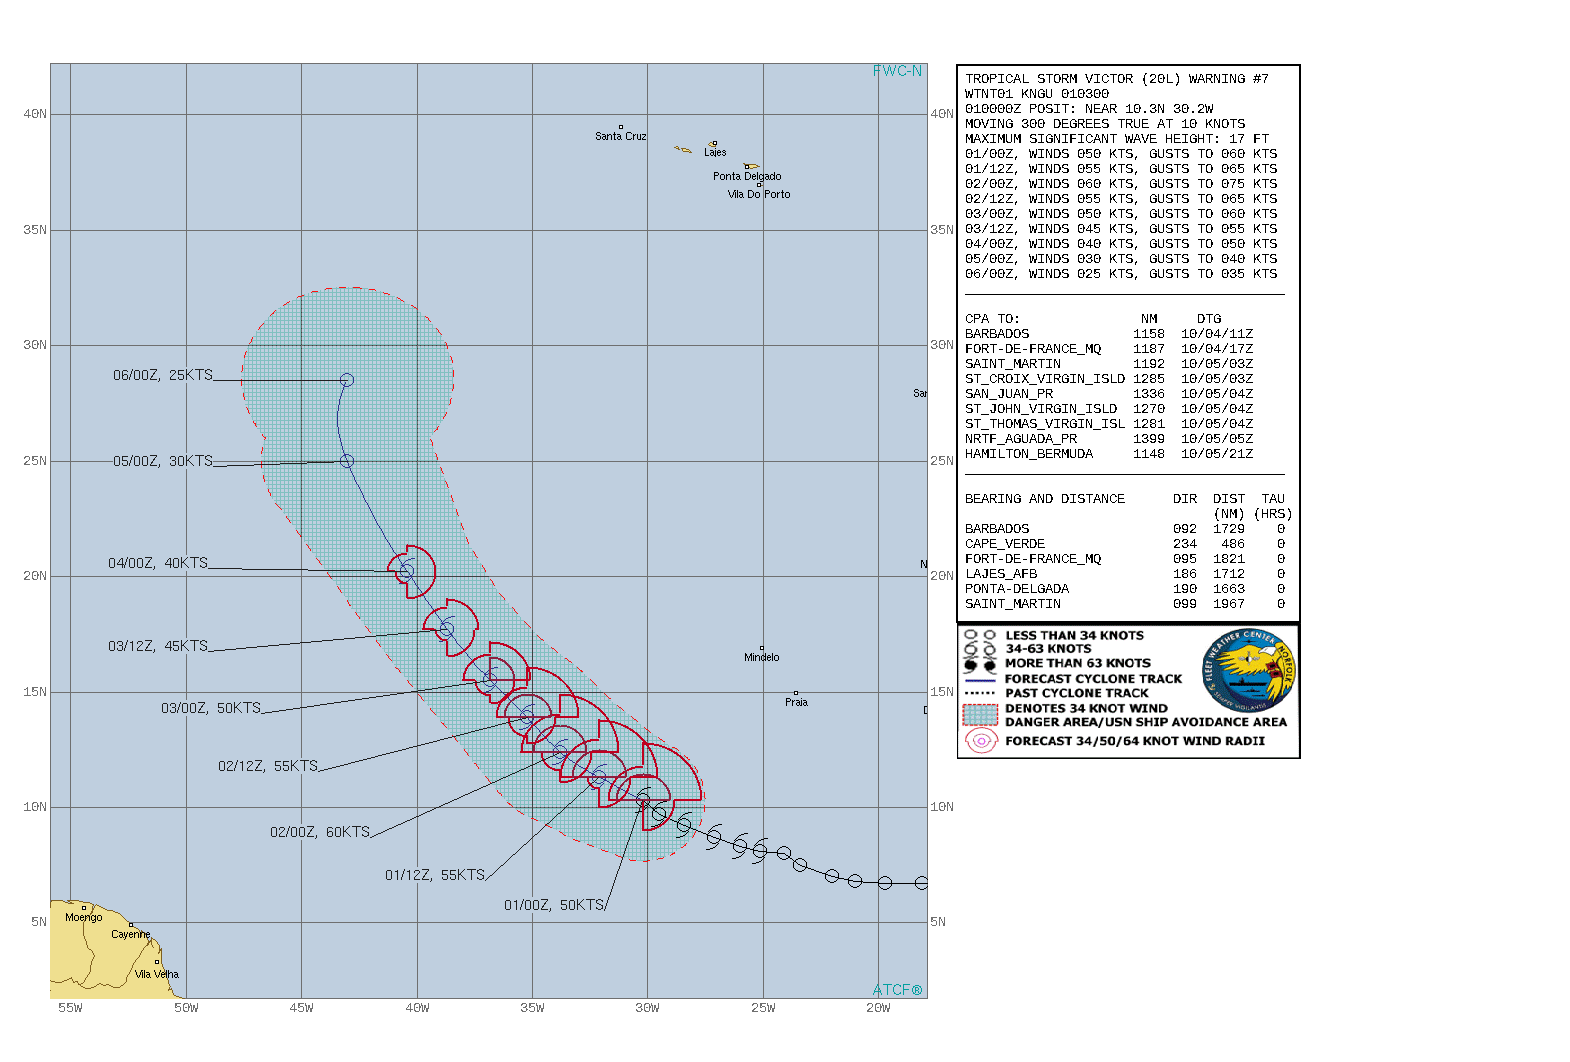 CURRENT INTENSITY IS 50KNOTS AND IS FORECAST TO PEAK AT 60KNOTS BY 02/00UTC.